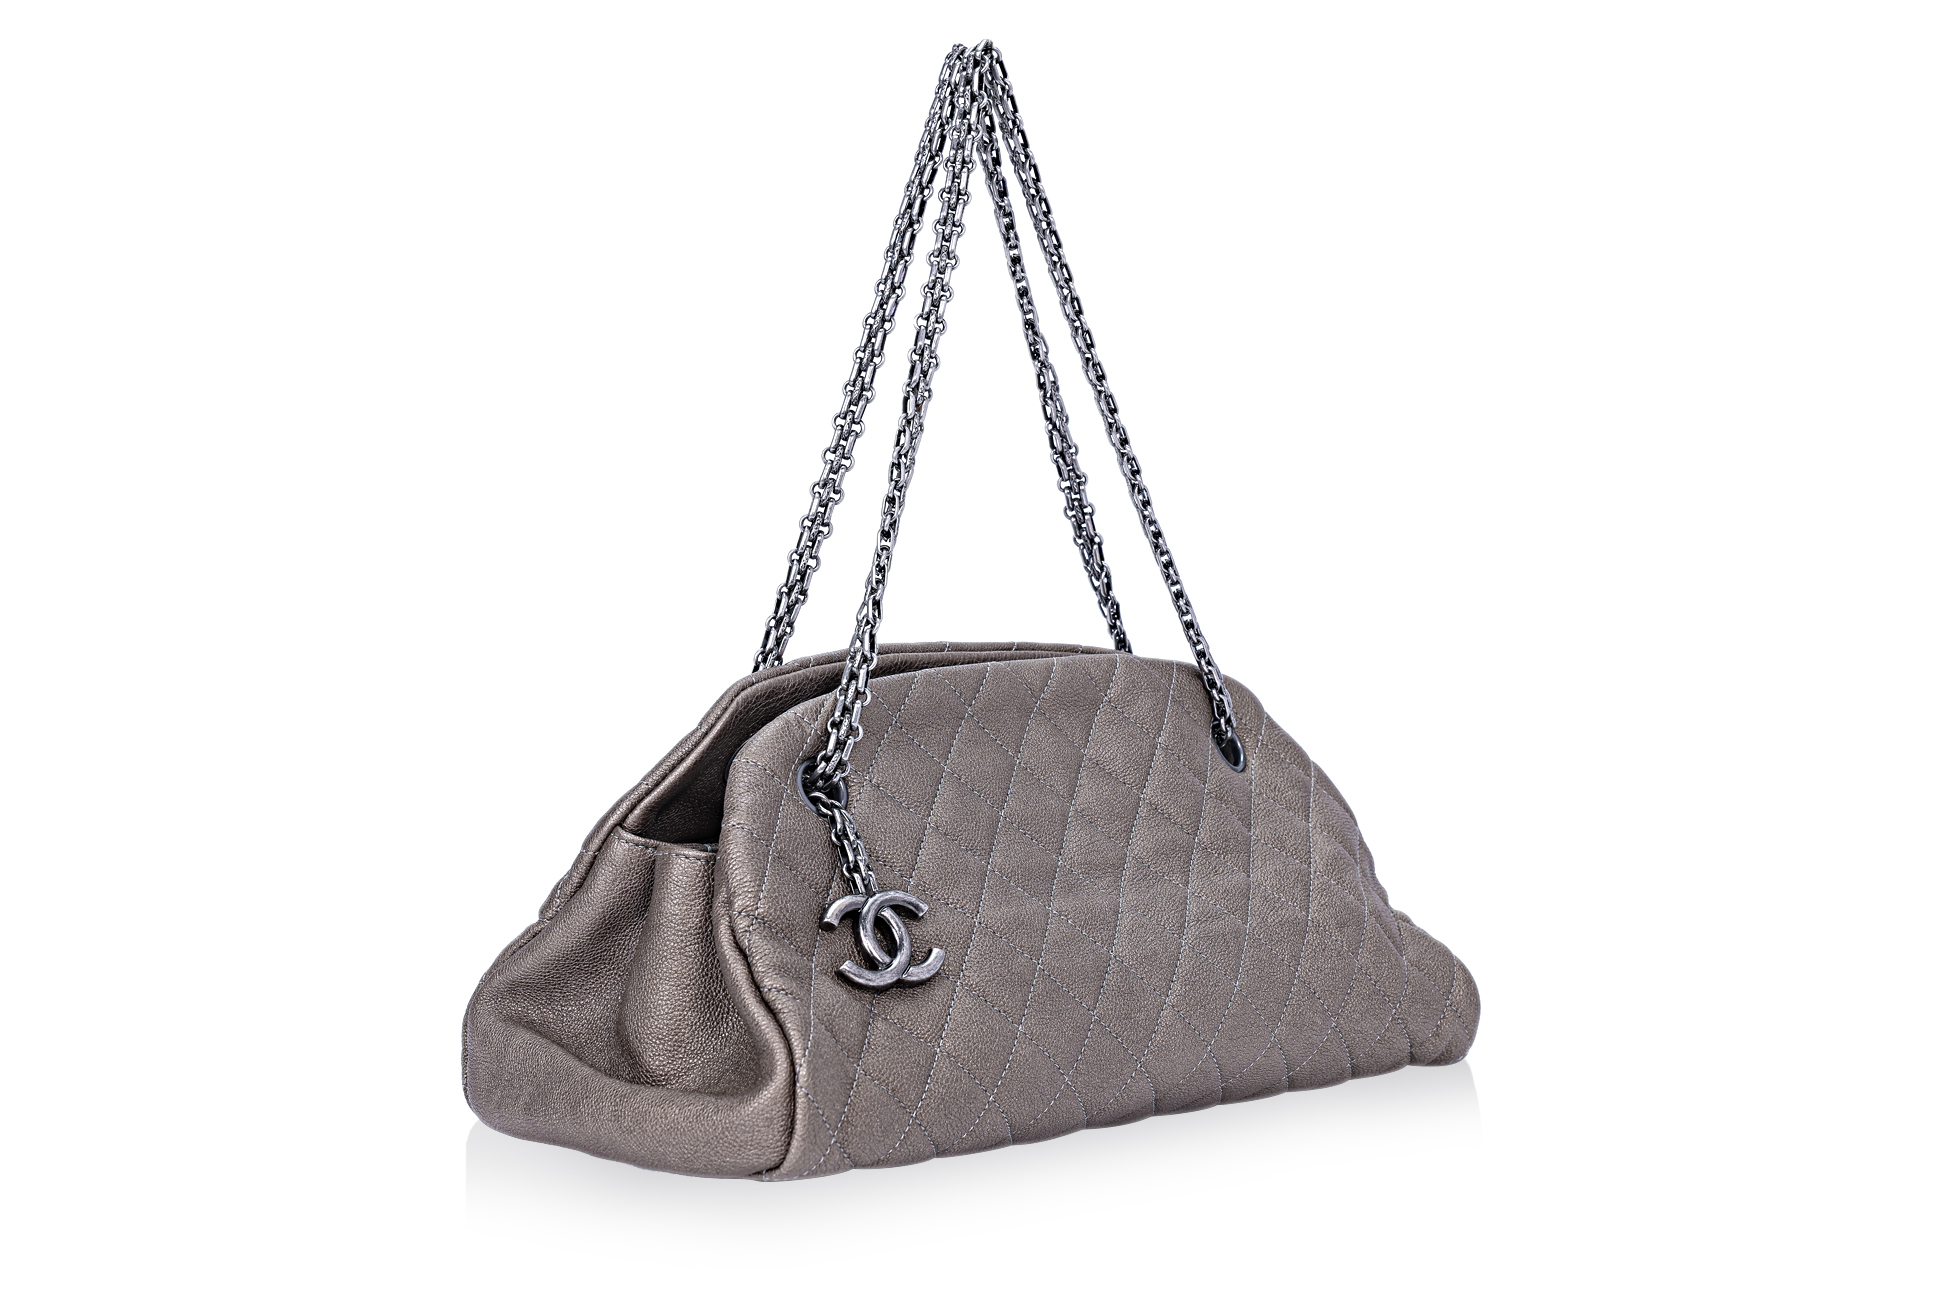 A CHANEL JUST MADEMOISELLE QUILTED CAVIAR LEATHER BAG - Image 2 of 4